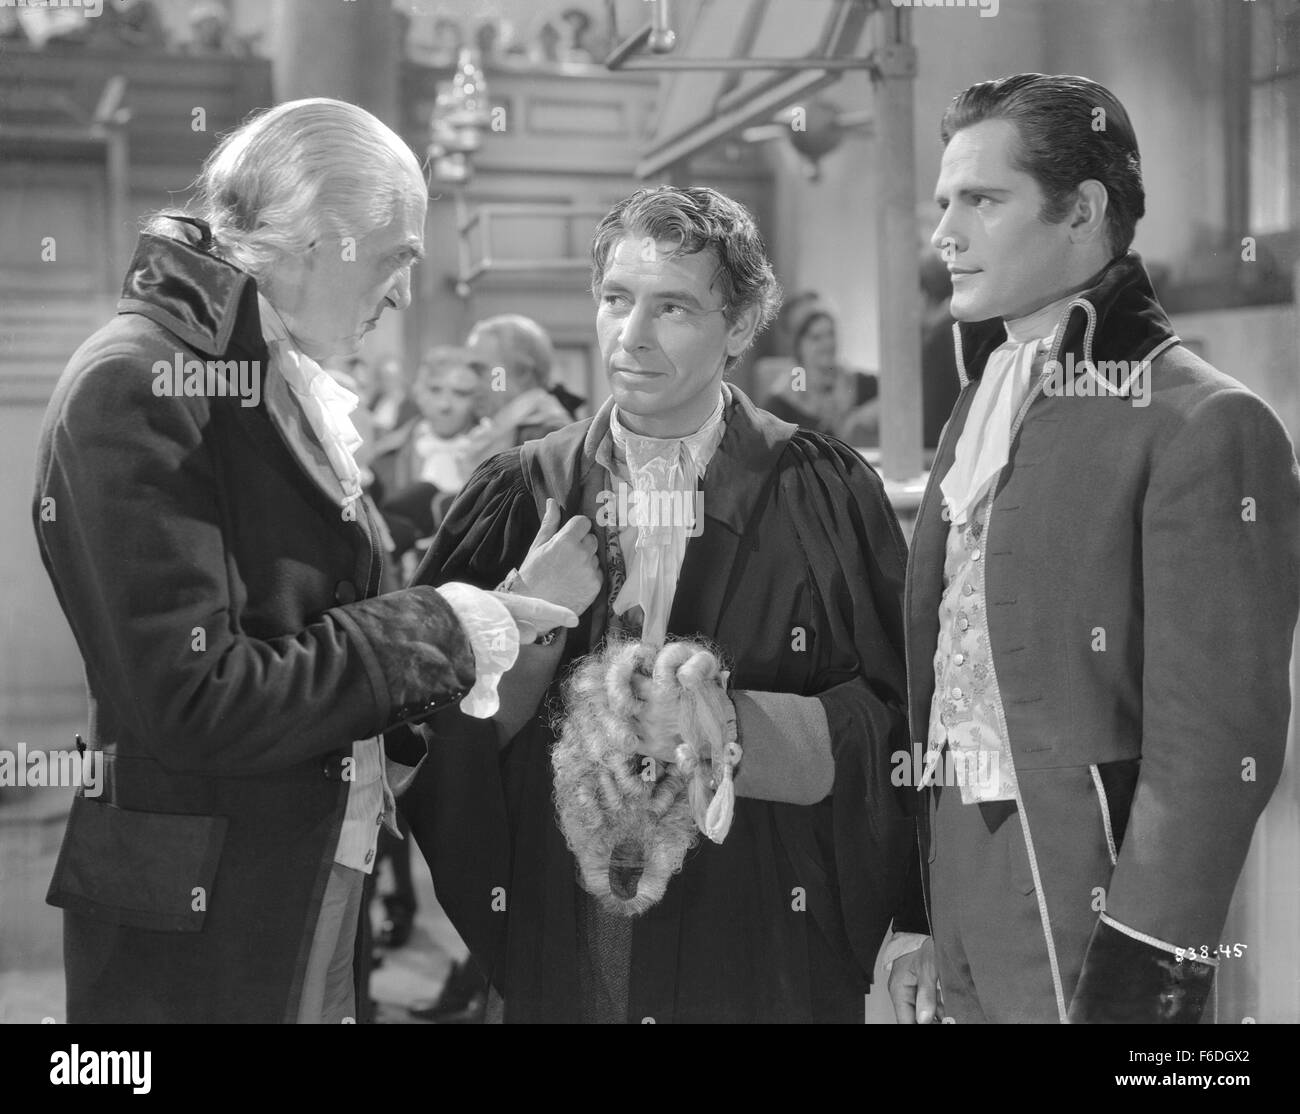 RELEASE DATE: December 25, 1935. MOVIE TITLE: A Tale of Two Cities. STUDIO: Metro-Goldwyn-Mayer (MGM). PLOT: An elaborate adaptation of Dickens' classic tale of the French Revolution. Dissipated lawyer Sydney Carton defends emigre Charles Darnay from charges of spying against England. He becomes enamored of Darnay's fiancZe, Lucie Manette, and agrees to help her save Darnay from the guillotine when he is captured by Revolutionaries in Paris. PICTURED: RONALD COLMAN as Sydney Carton. Stock Photo